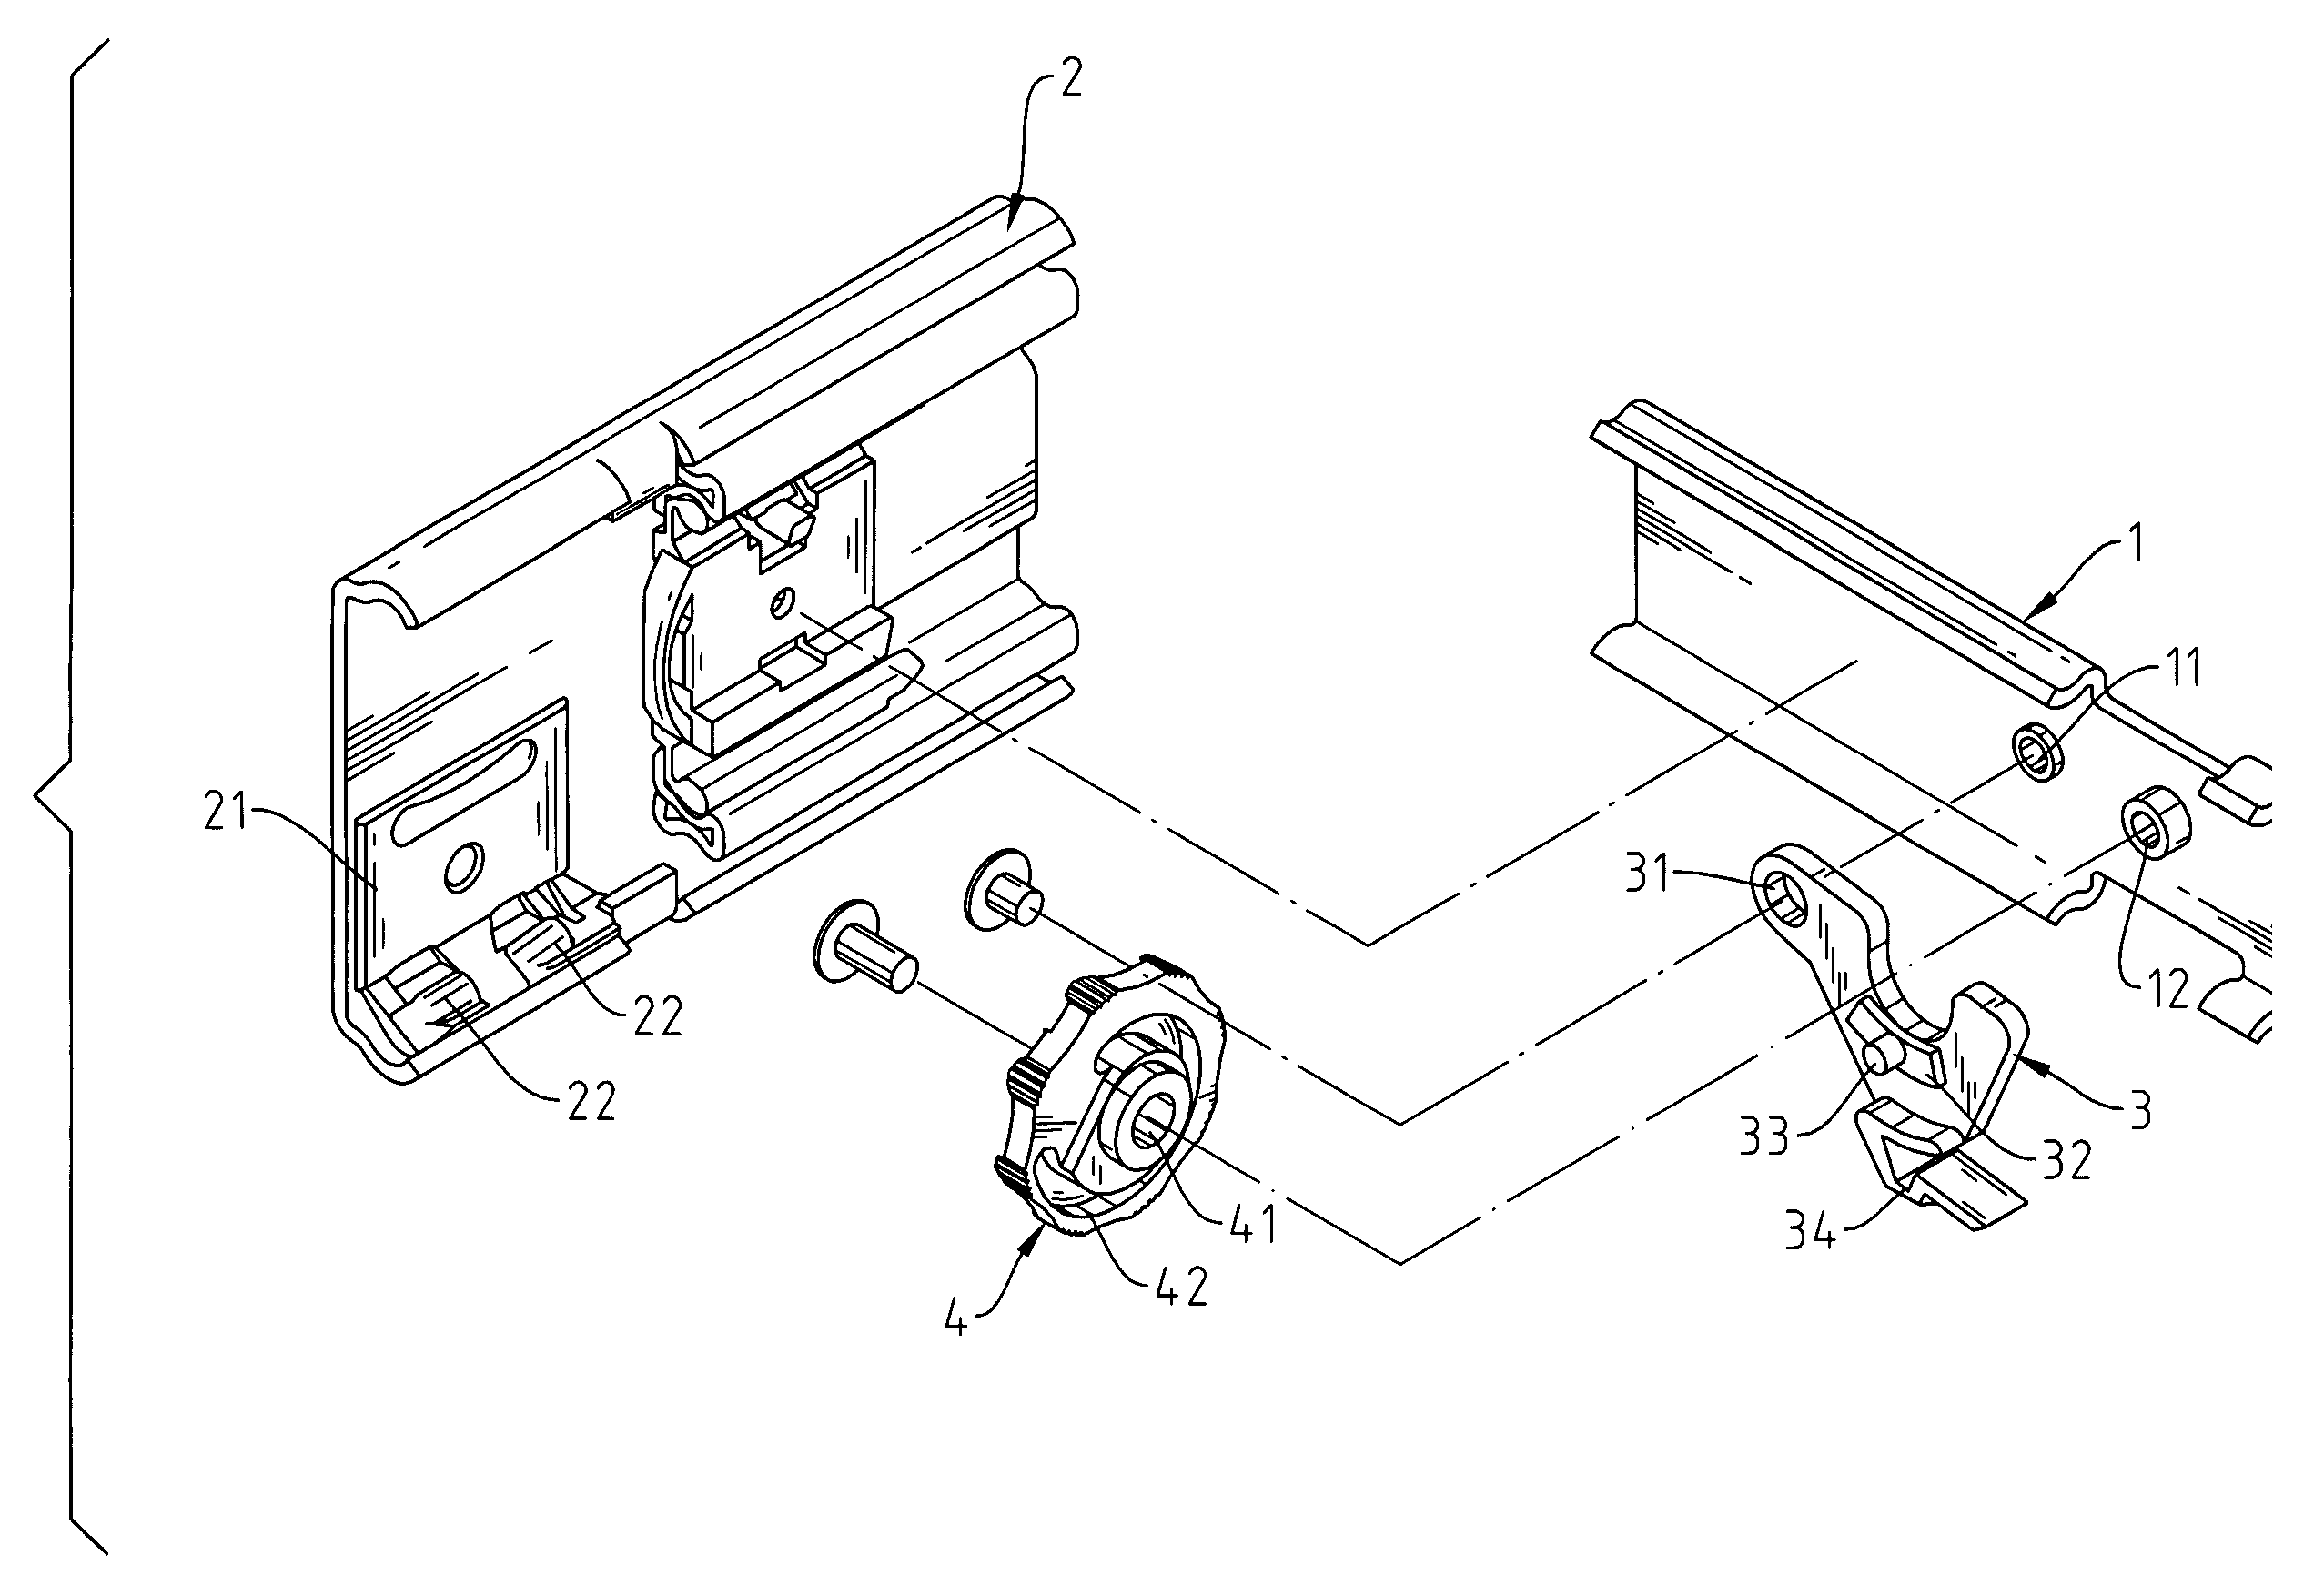 Structure of pull adjustable catch for drawer slide